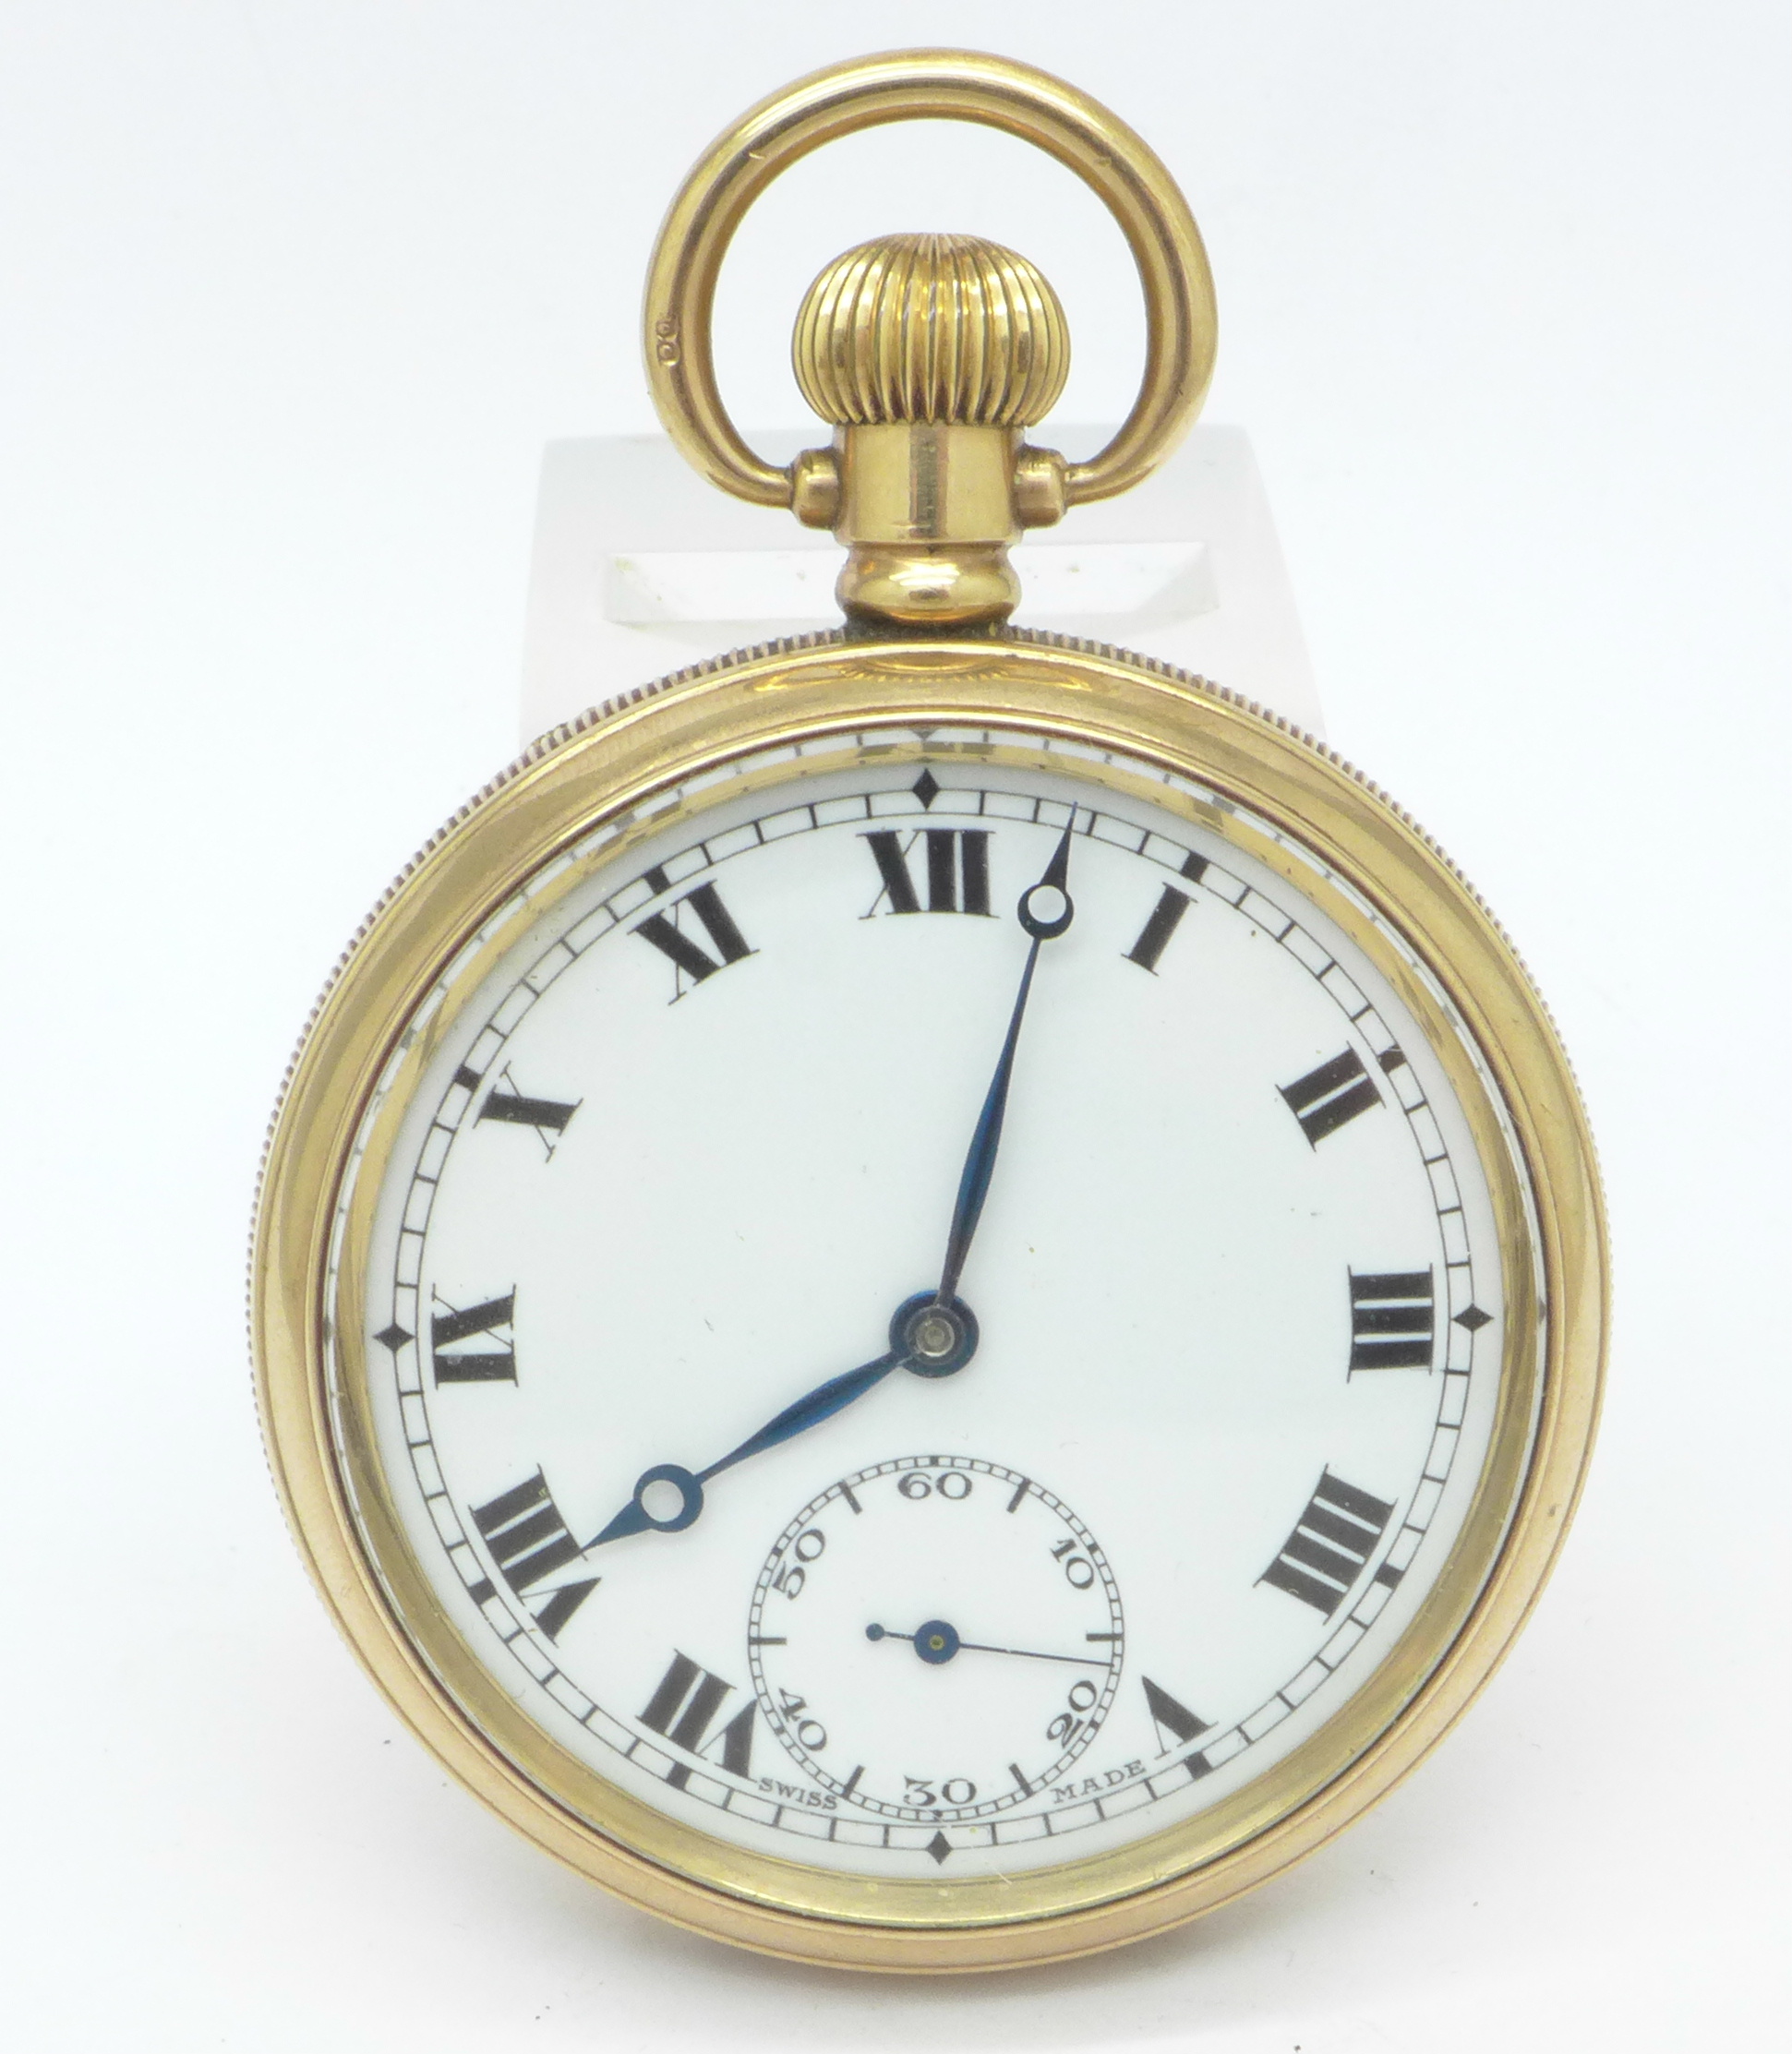 A gold plated Record top wind pocket watch